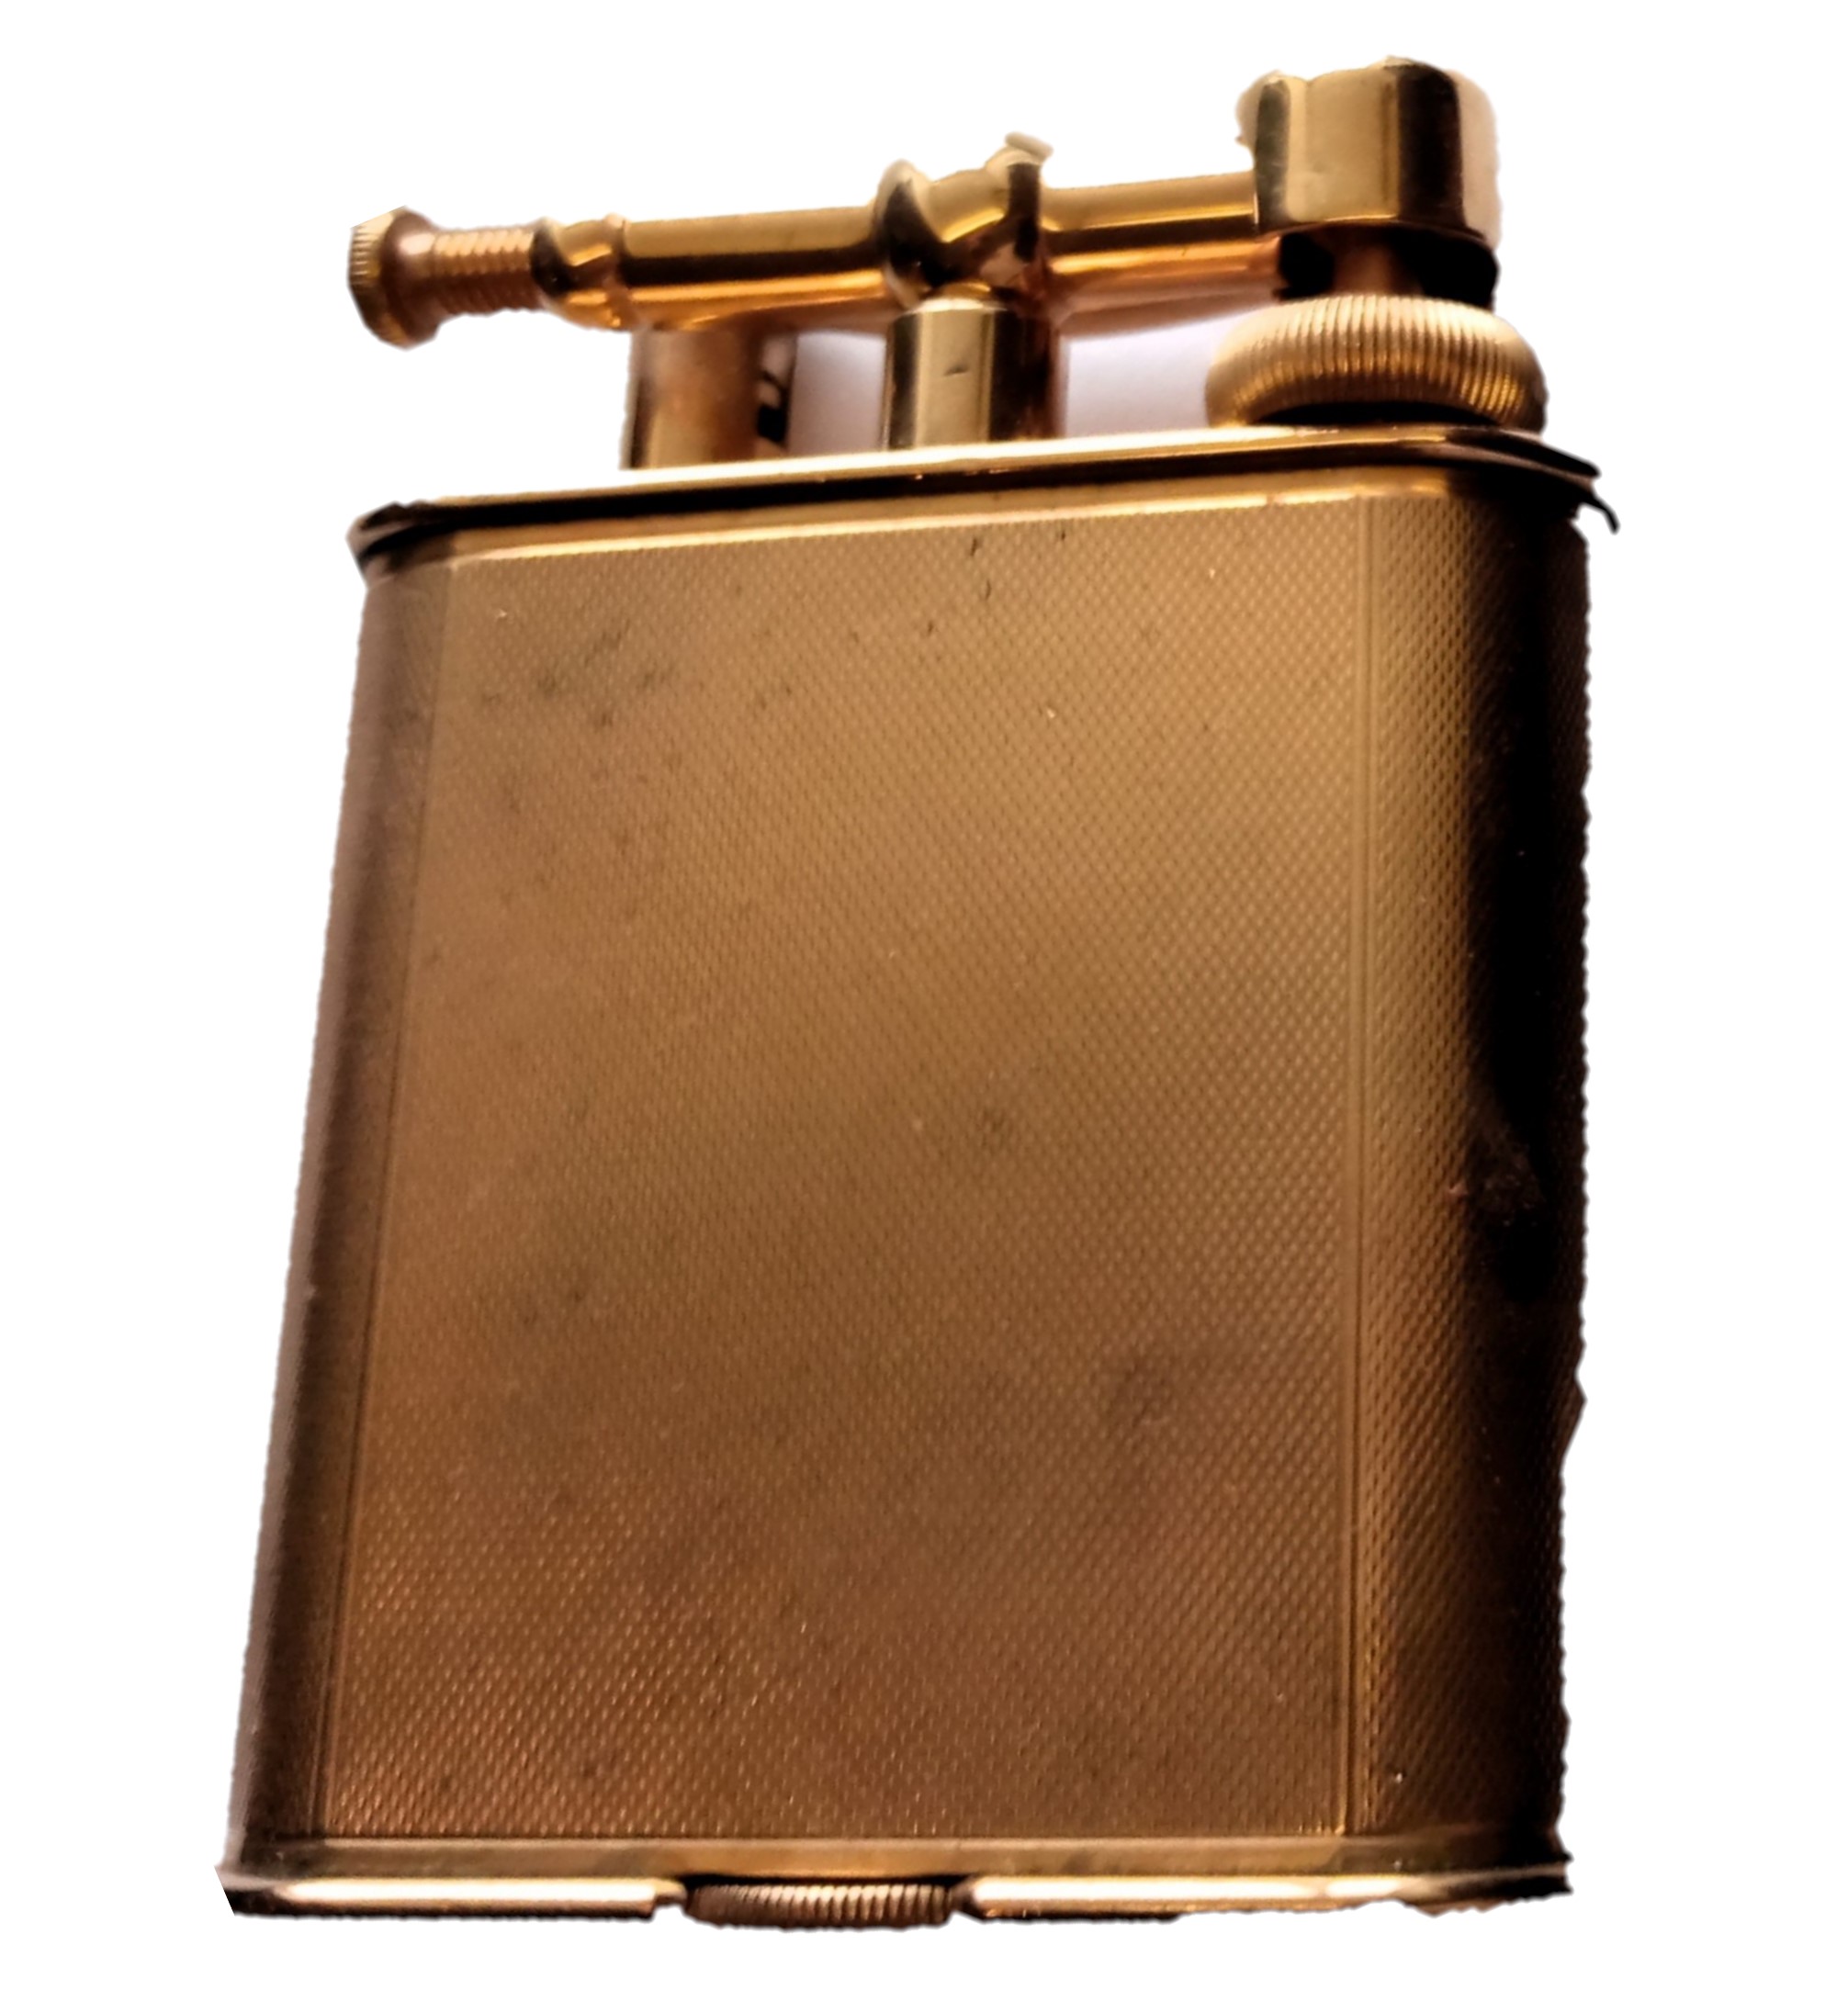 Dunhill Lighters 1668 - Click for details